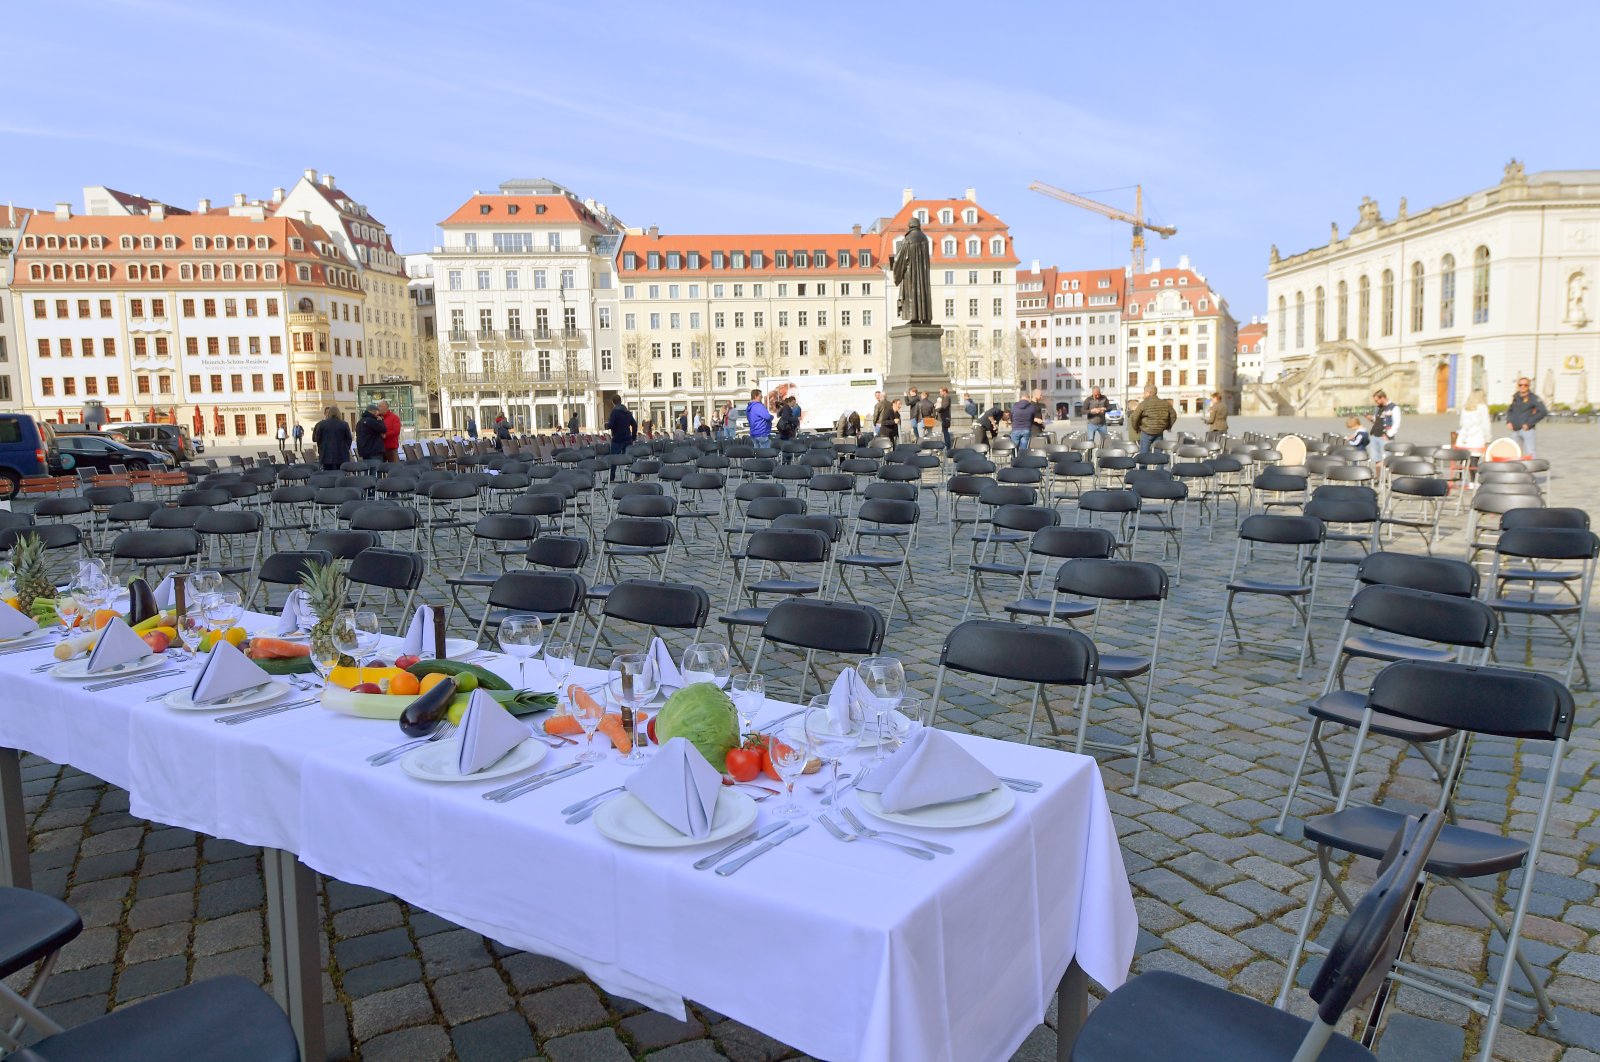 Empty chairs and decorated tables are set up in Neumarkt square to call attention to the difficult situation of hotel and restaurant owners as the spread of the coronavirus continues, Dresden, Germany, April 17, 2020. (Reuters Photo)